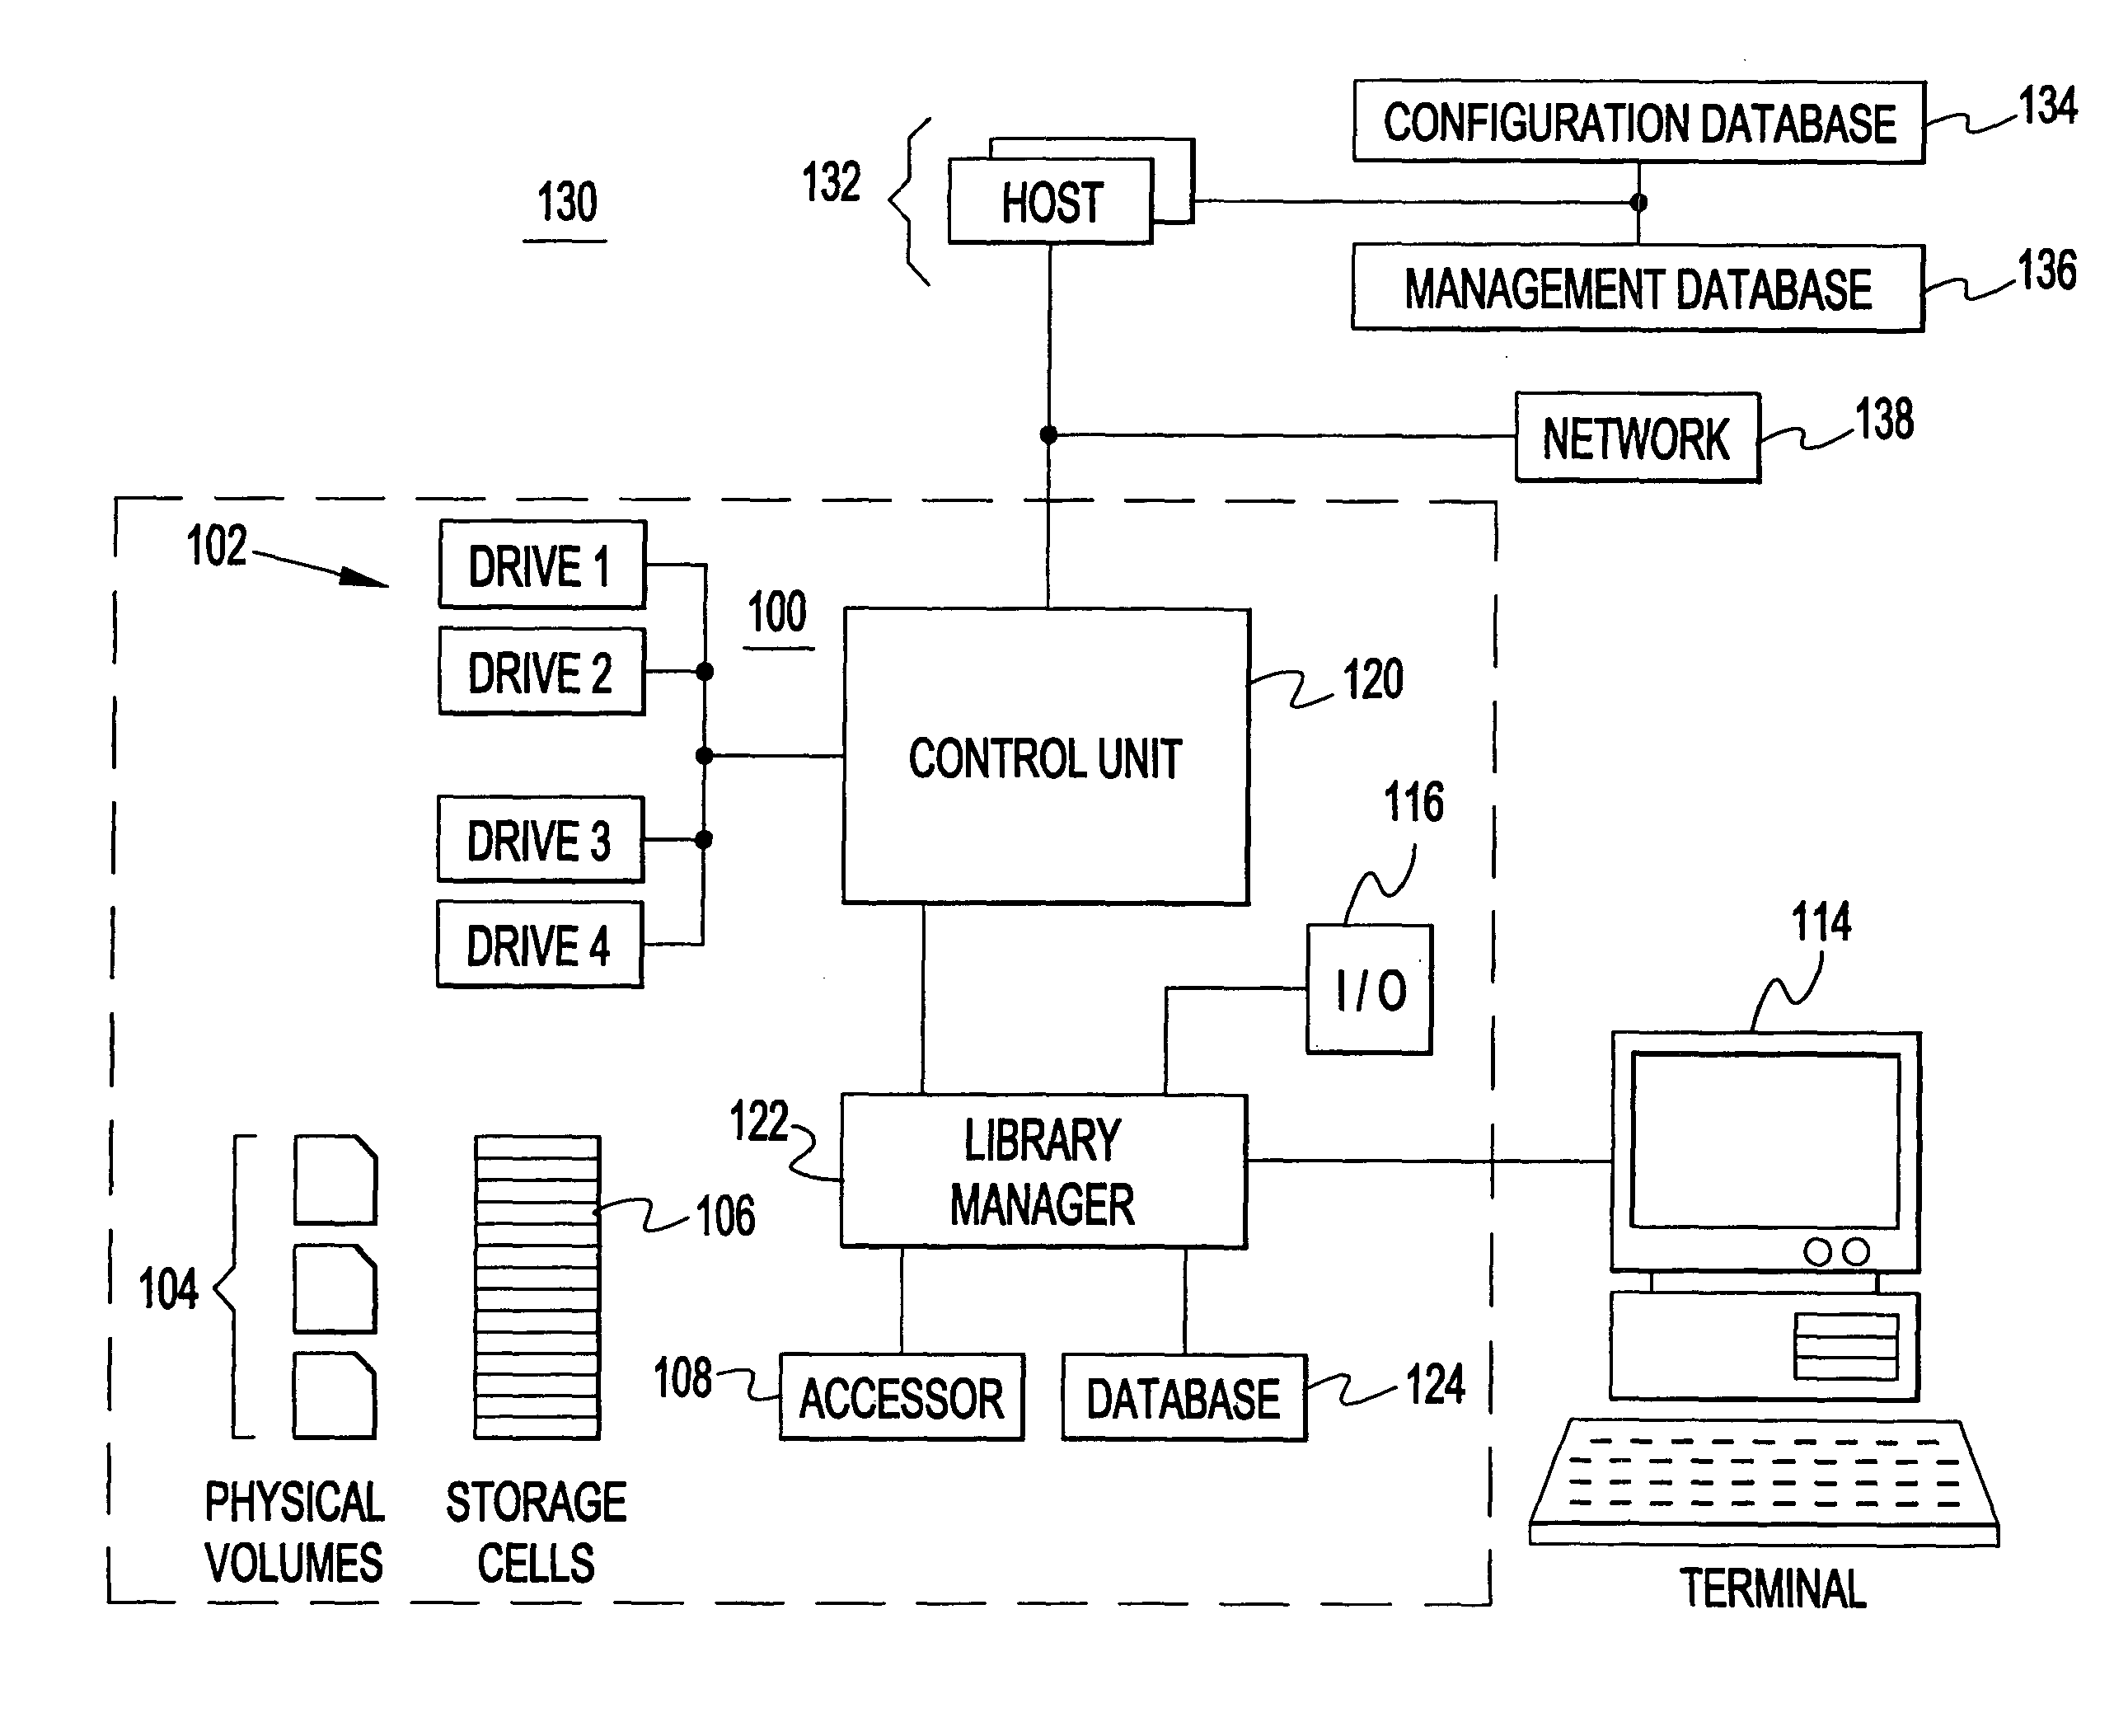 Method for testing media in a library without inserting media into the library database